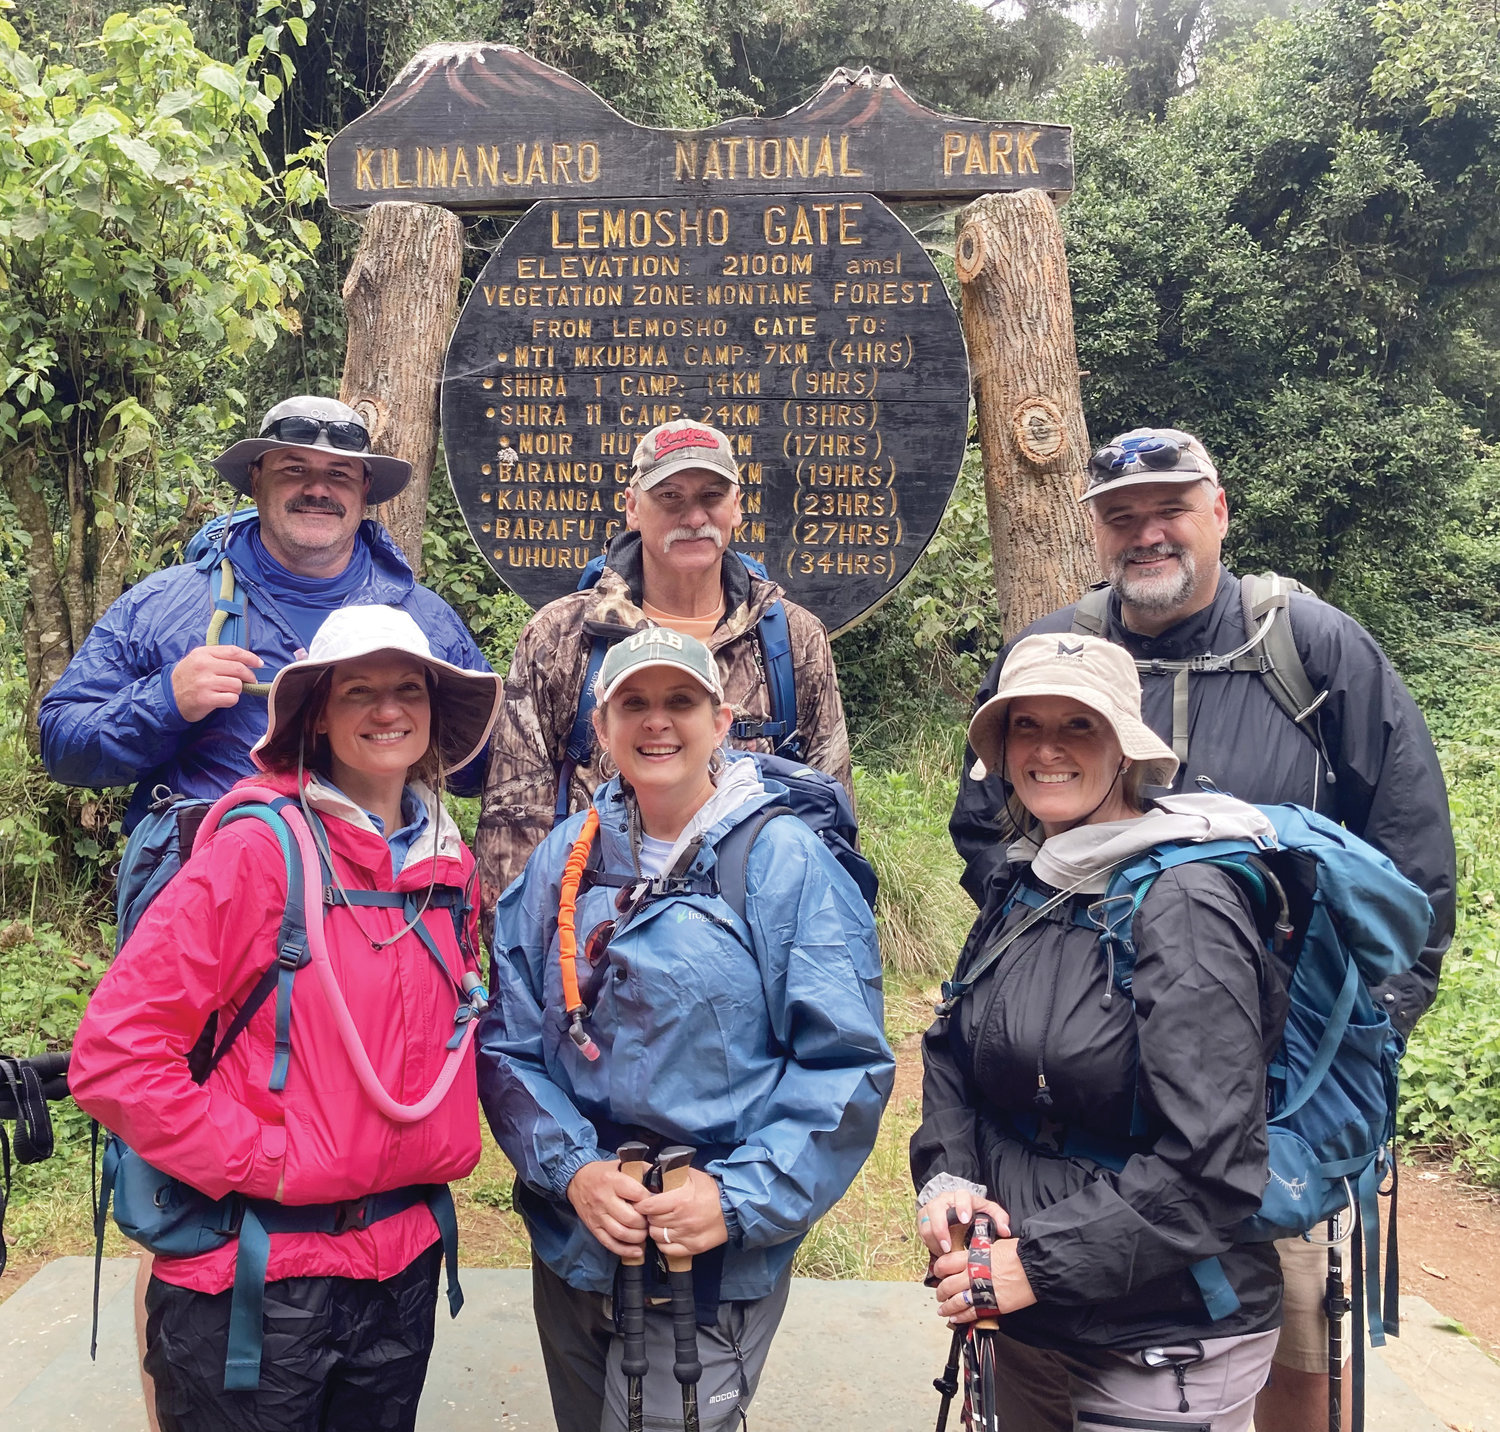 On their way in Kilimanjaro National Park, from left, back row, Justin Carr, Vince Fulks and Ted Cox. On the front row are Nicolle Carr, Kimberly Fulks and Lori Cox.